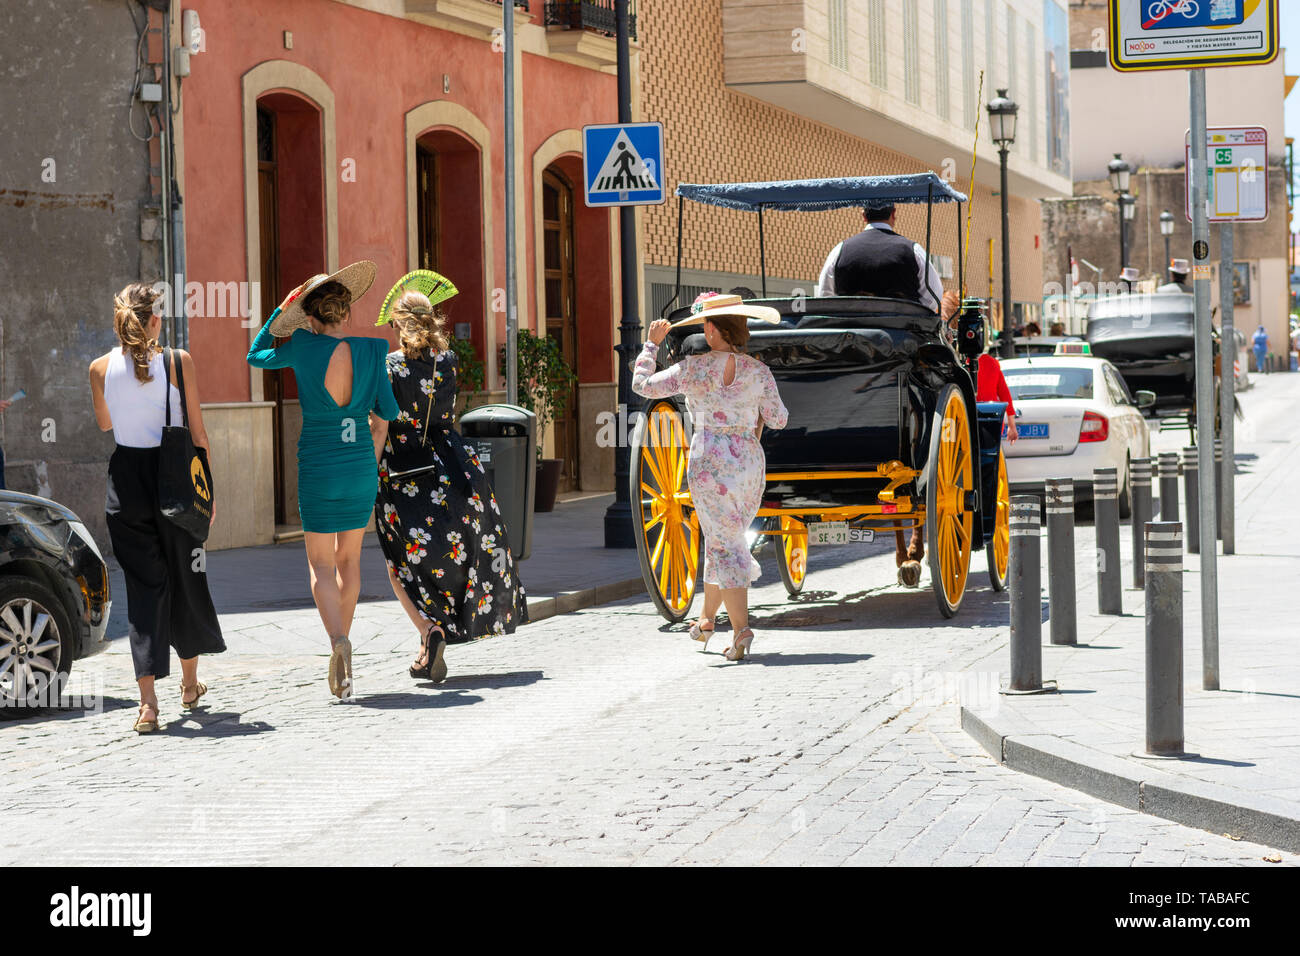 Glamorous wedding party guests following a horse drawn chariot, Seville, Andalusia region, Spain Stock Photo